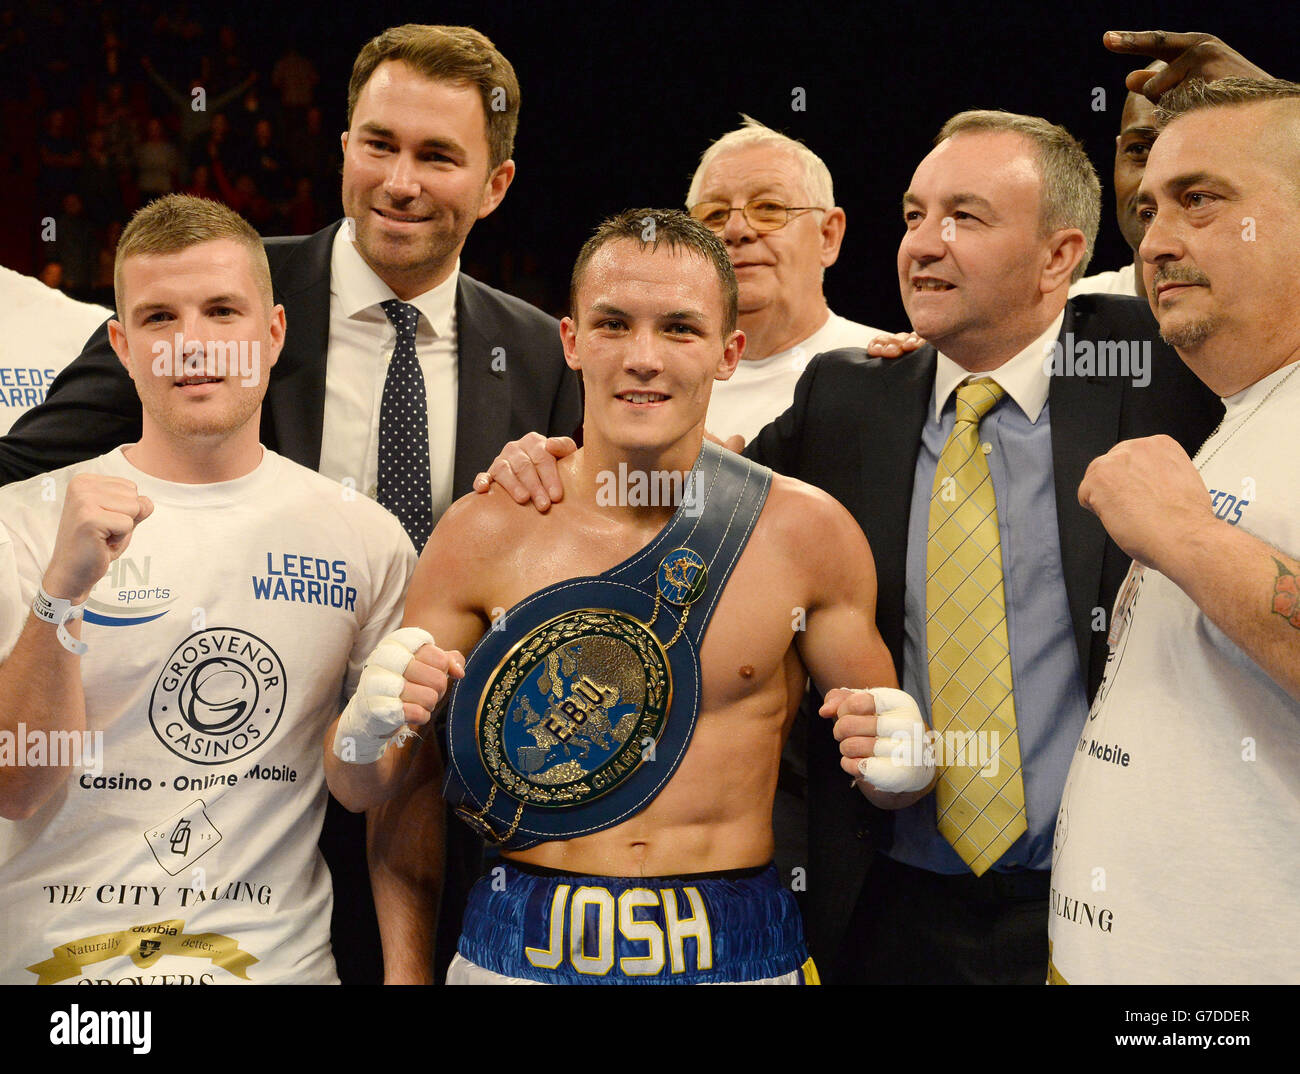 Josh Warrington (centre) celebrates after beating Davide Dieli in the European Featherweight title contest at the First Direct Arena, Leeds. Stock Photo